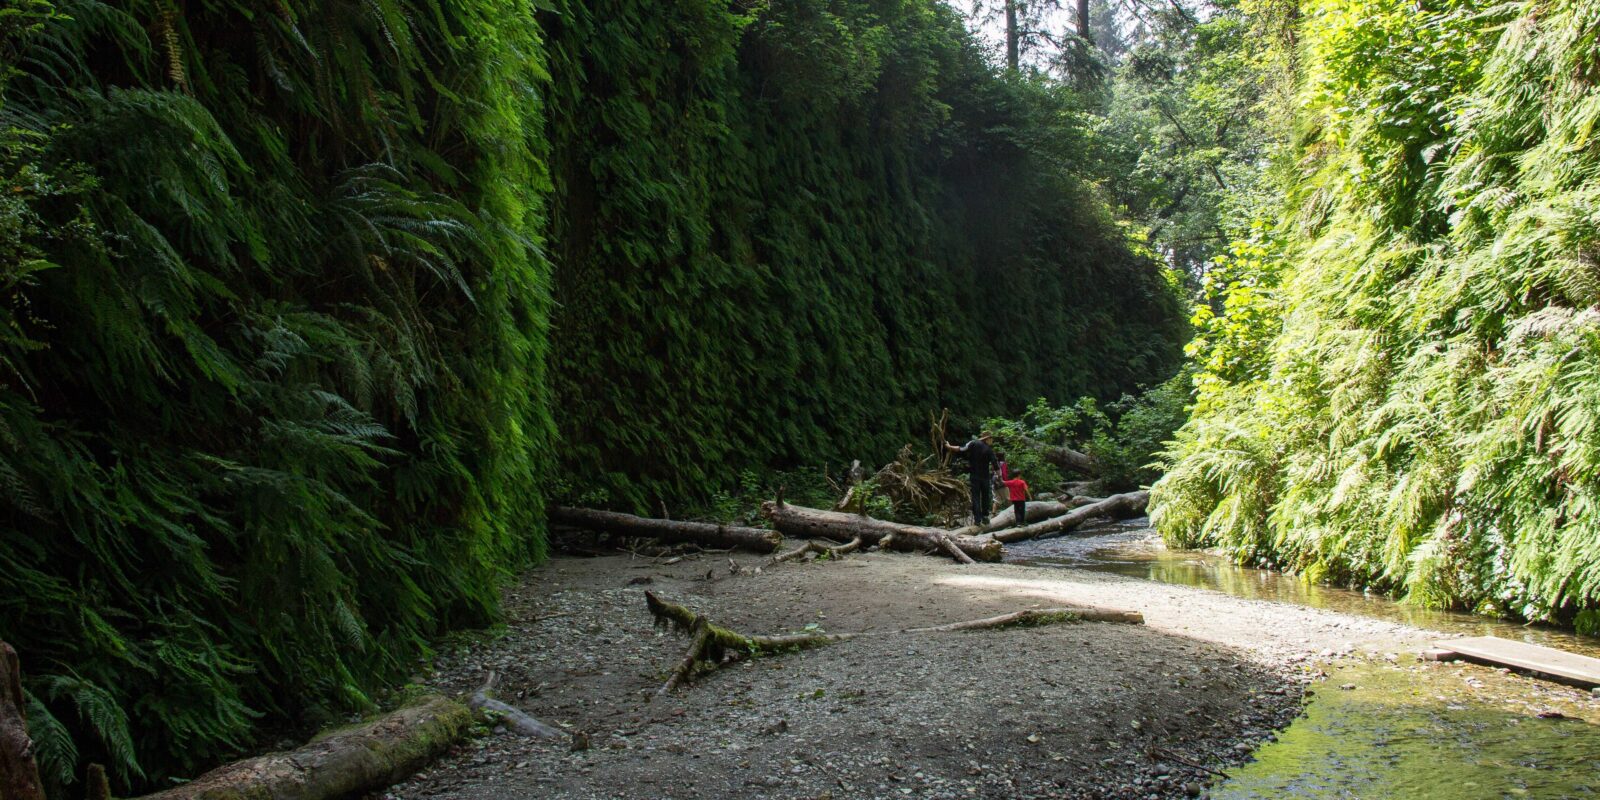 Fern canyon with 2 hikers